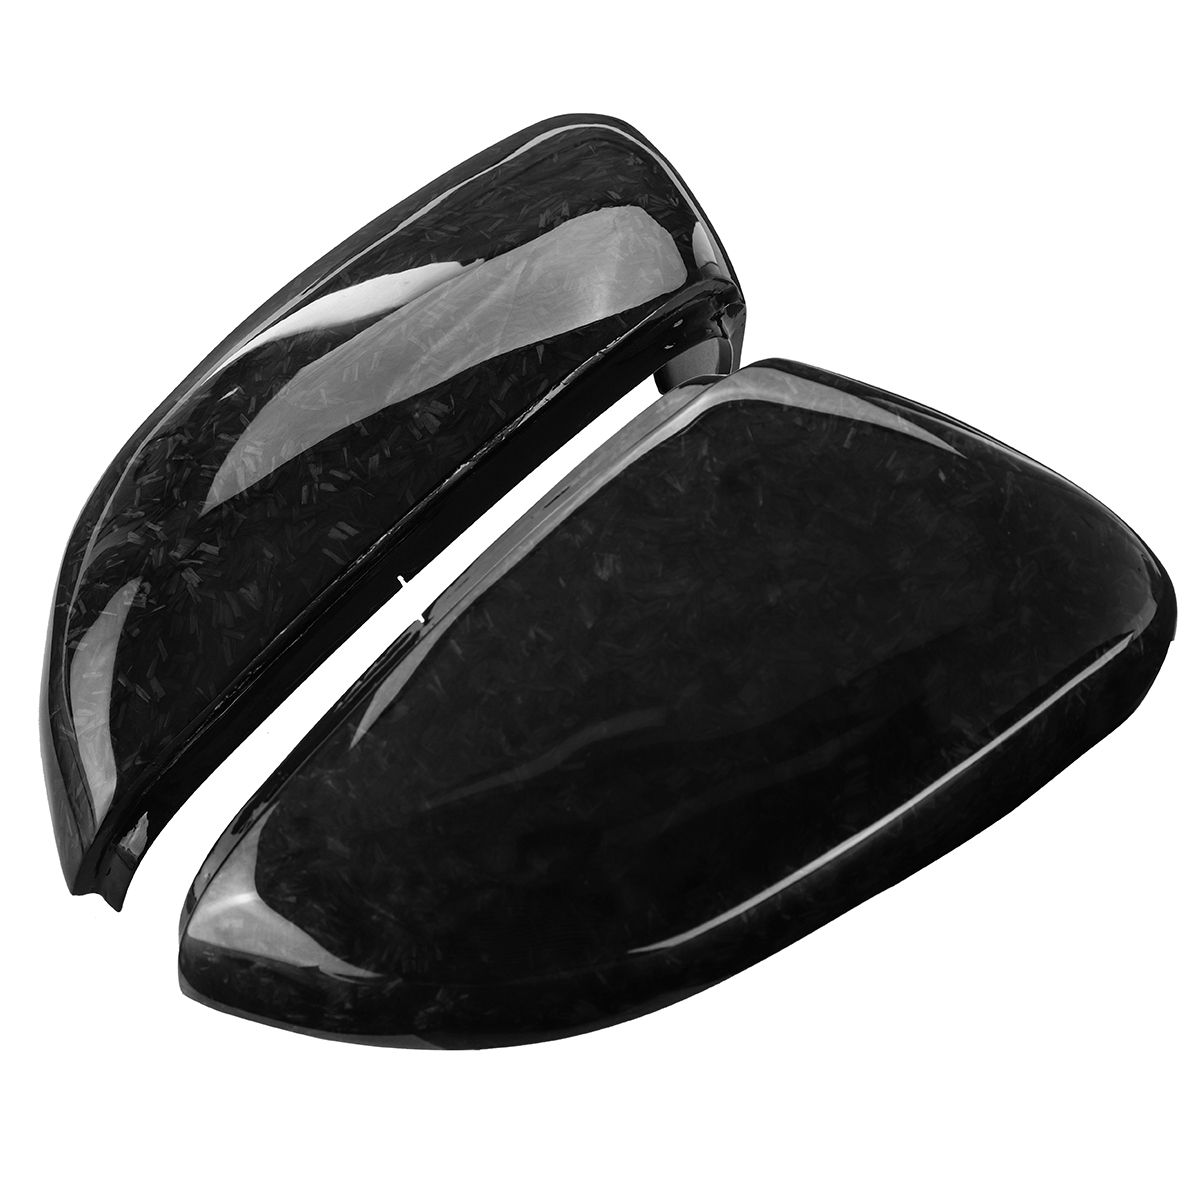 2Pcs-Car-Real-Carbon-Fiber-Wing-Mirror-Cover-For-VW-Golf-6-GTI-R20-MK6-2008-2012-1614527